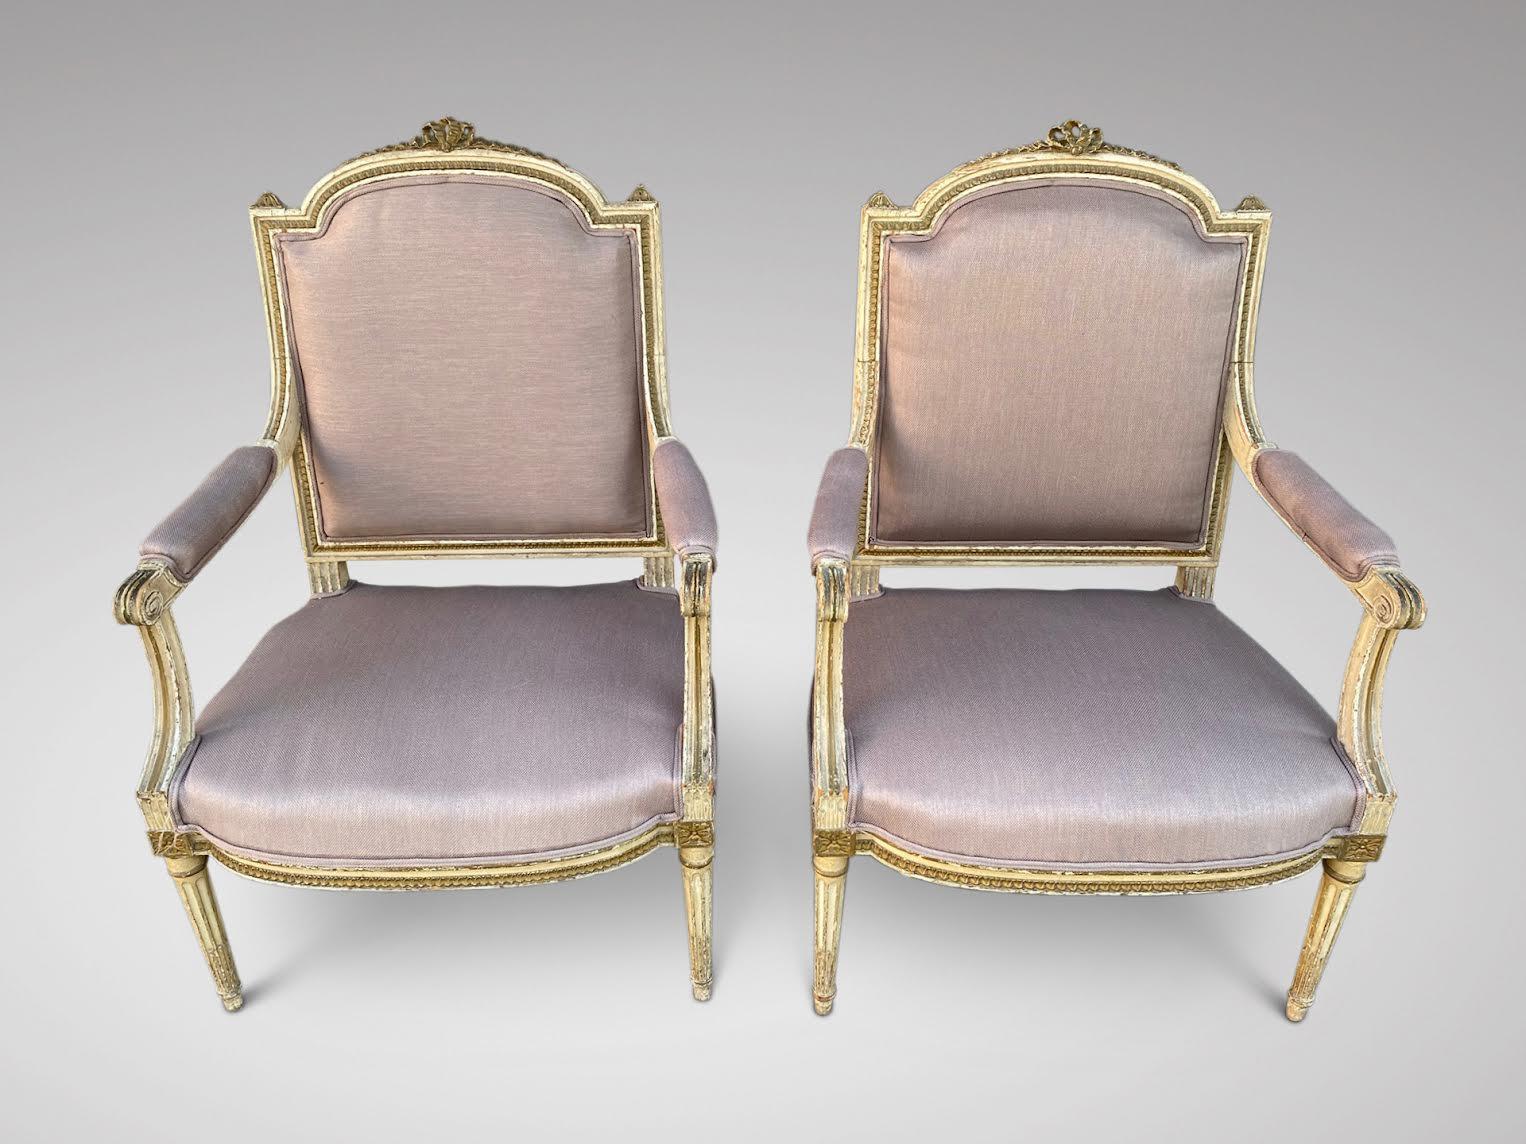 19th Century French Louis XVI Reupholstered Carved Pair of Armchairs In Good Condition For Sale In Petworth,West Sussex, GB